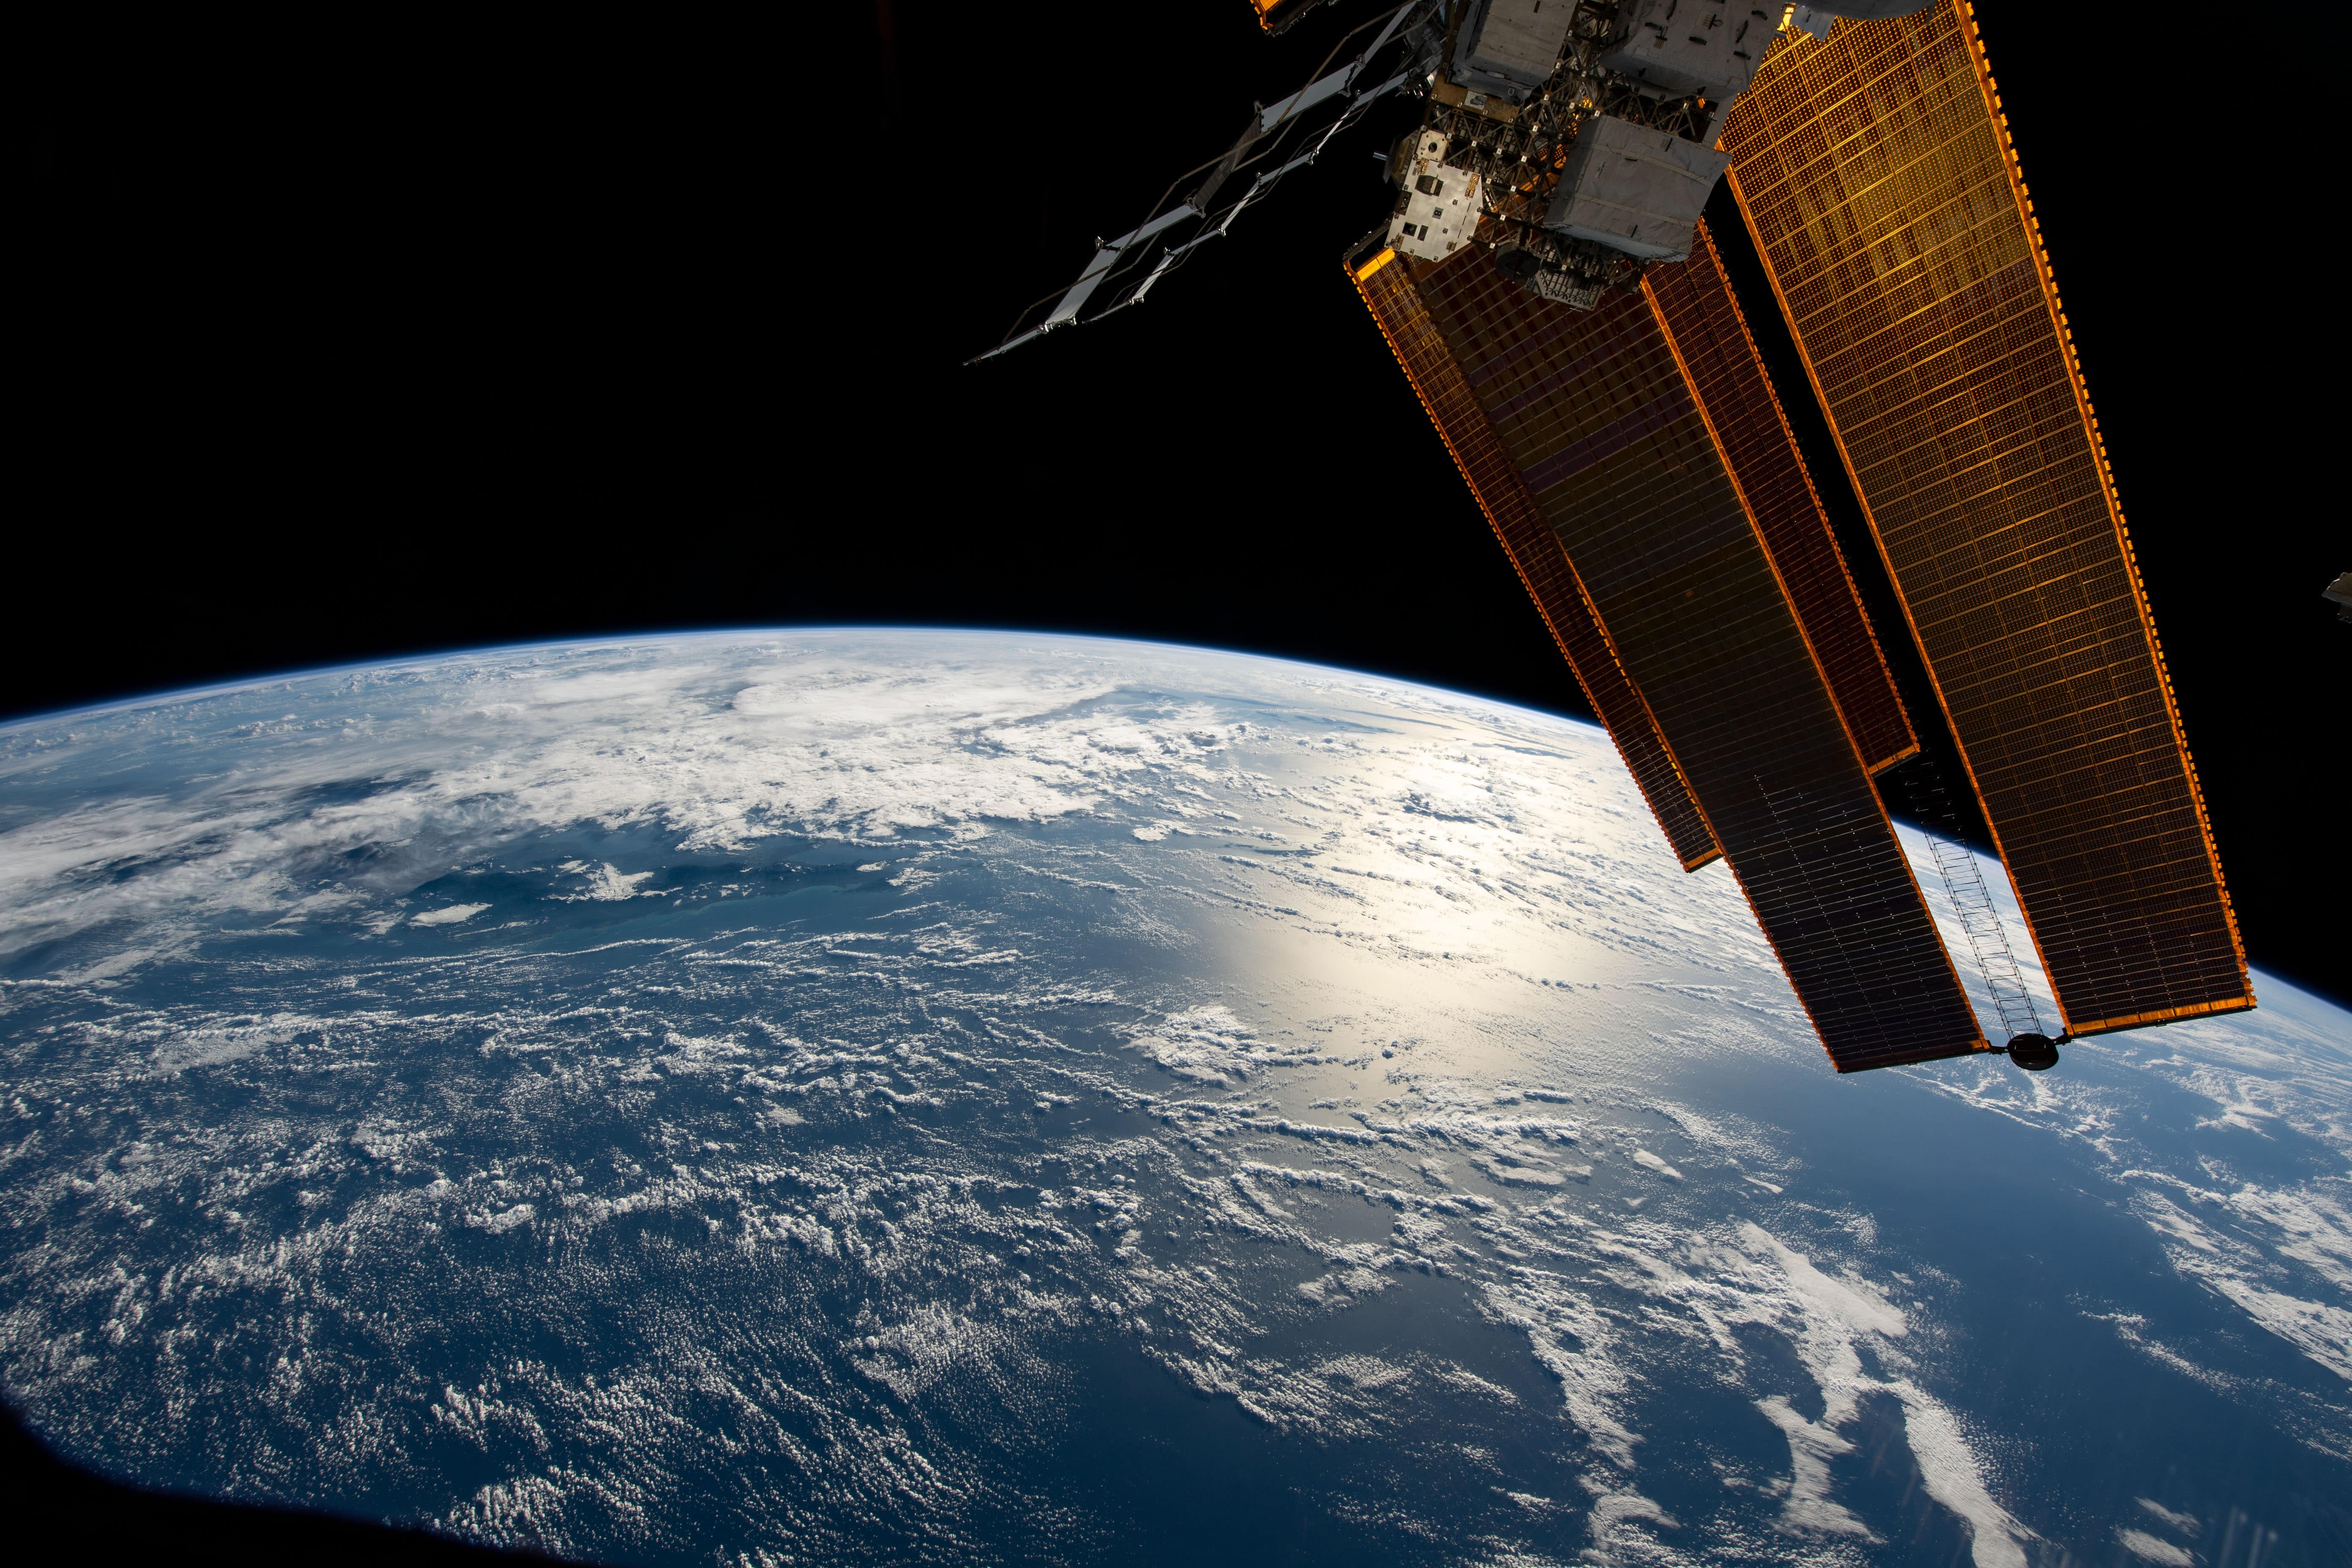 View of the Earth taken from the ISS, with part of the ISS in the image.